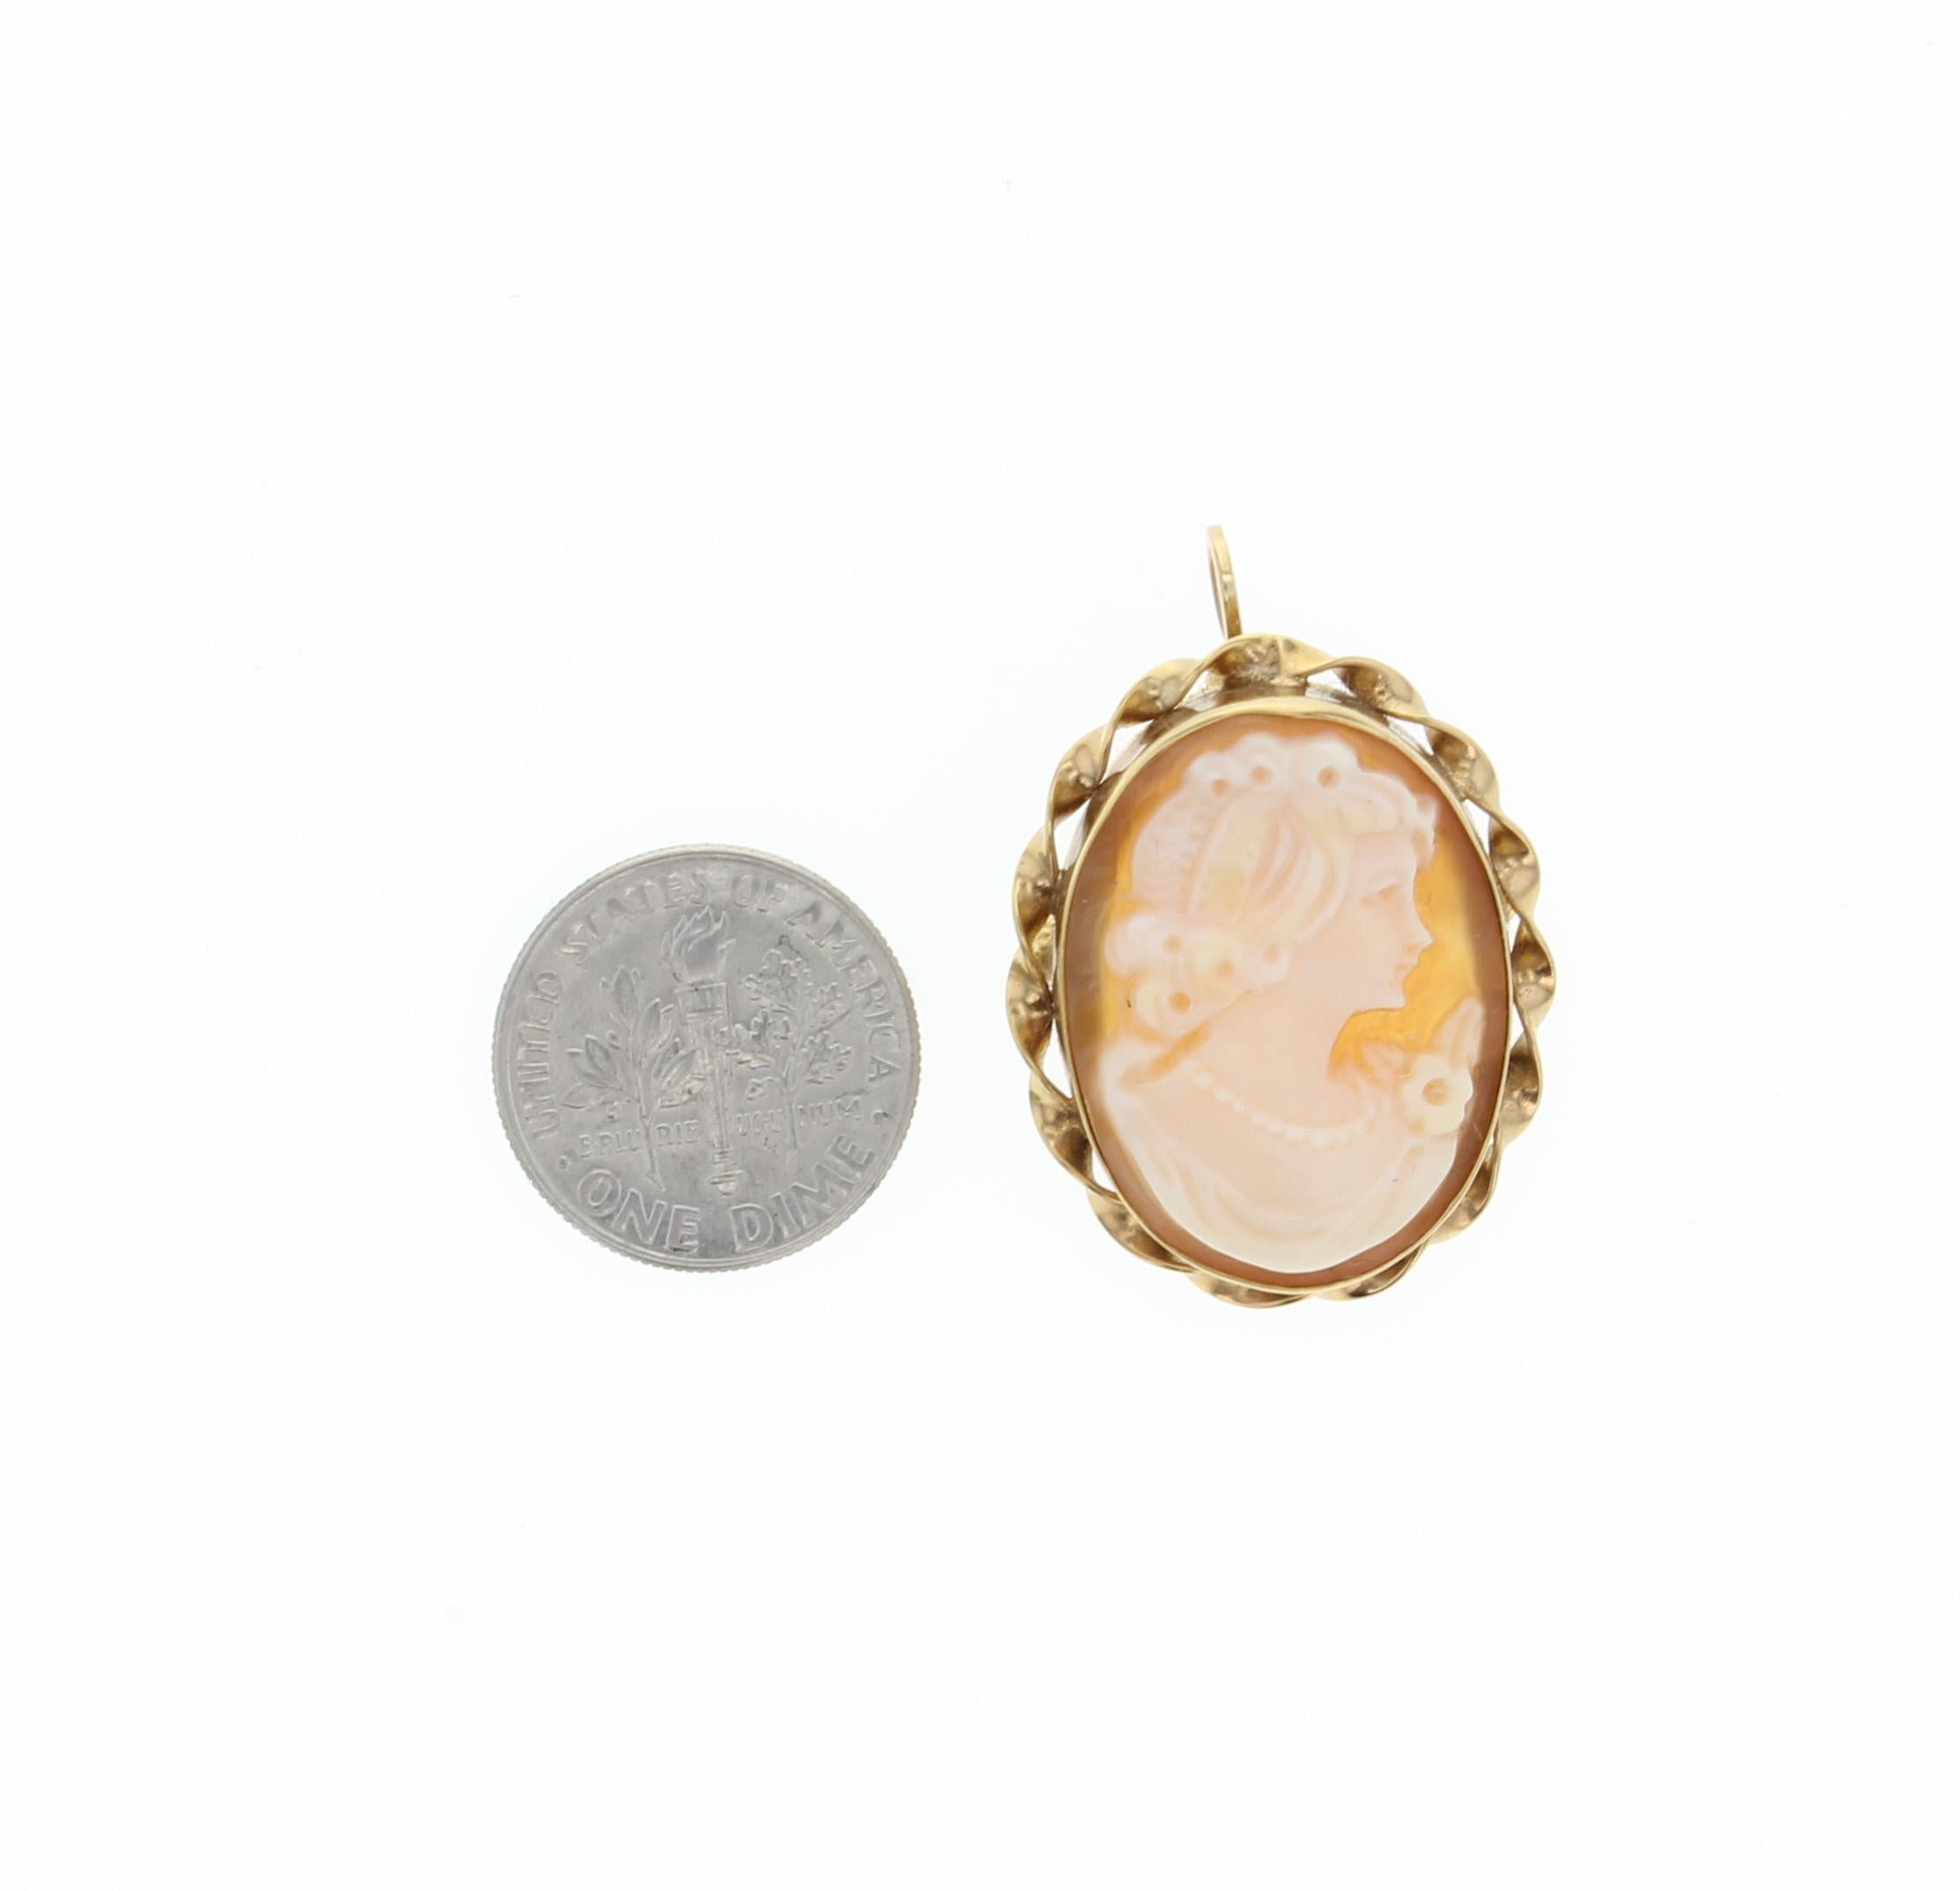 Vintage Shell Cameo Brooch/Pin Pendant with Oval Gold Tone Frame and Carved Shell Victorian Woman Profile 

A historical classic turned modern trend. Once revered as a symbol of status, this vintage-inspired work of art is the face of fashion today.